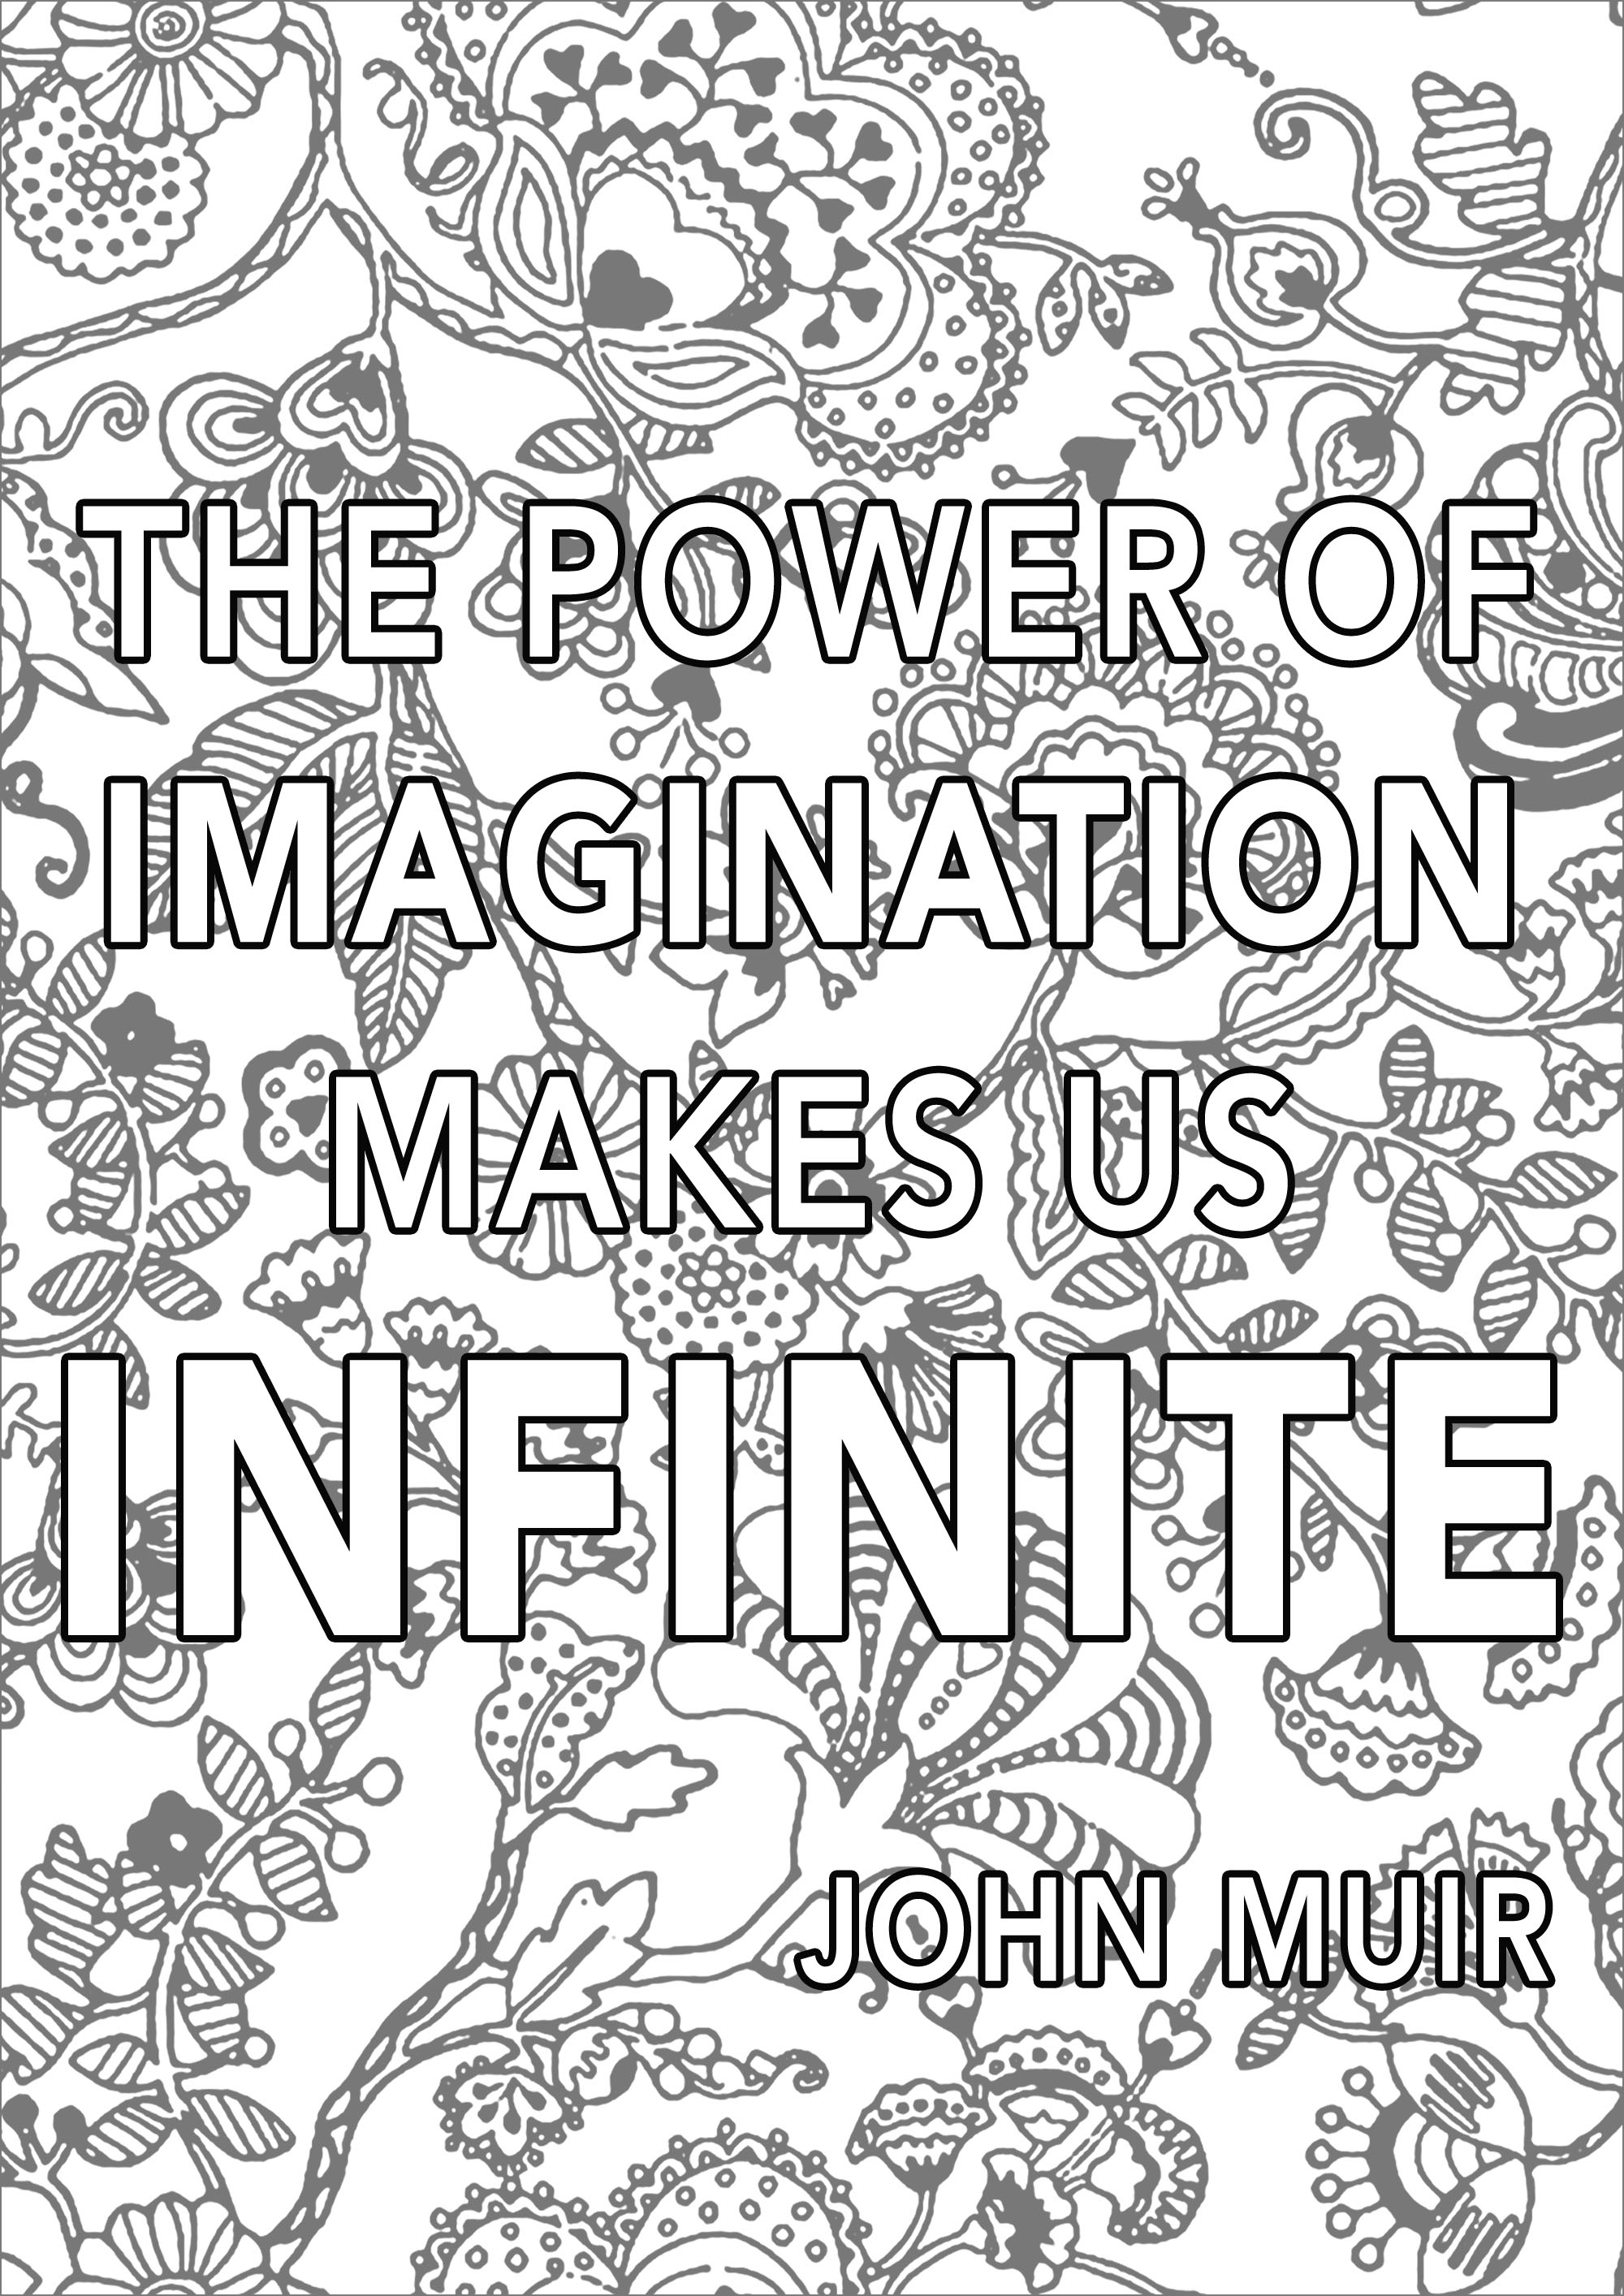 The Power of Imagination makes us Infinite - Art Adult Coloring Pages